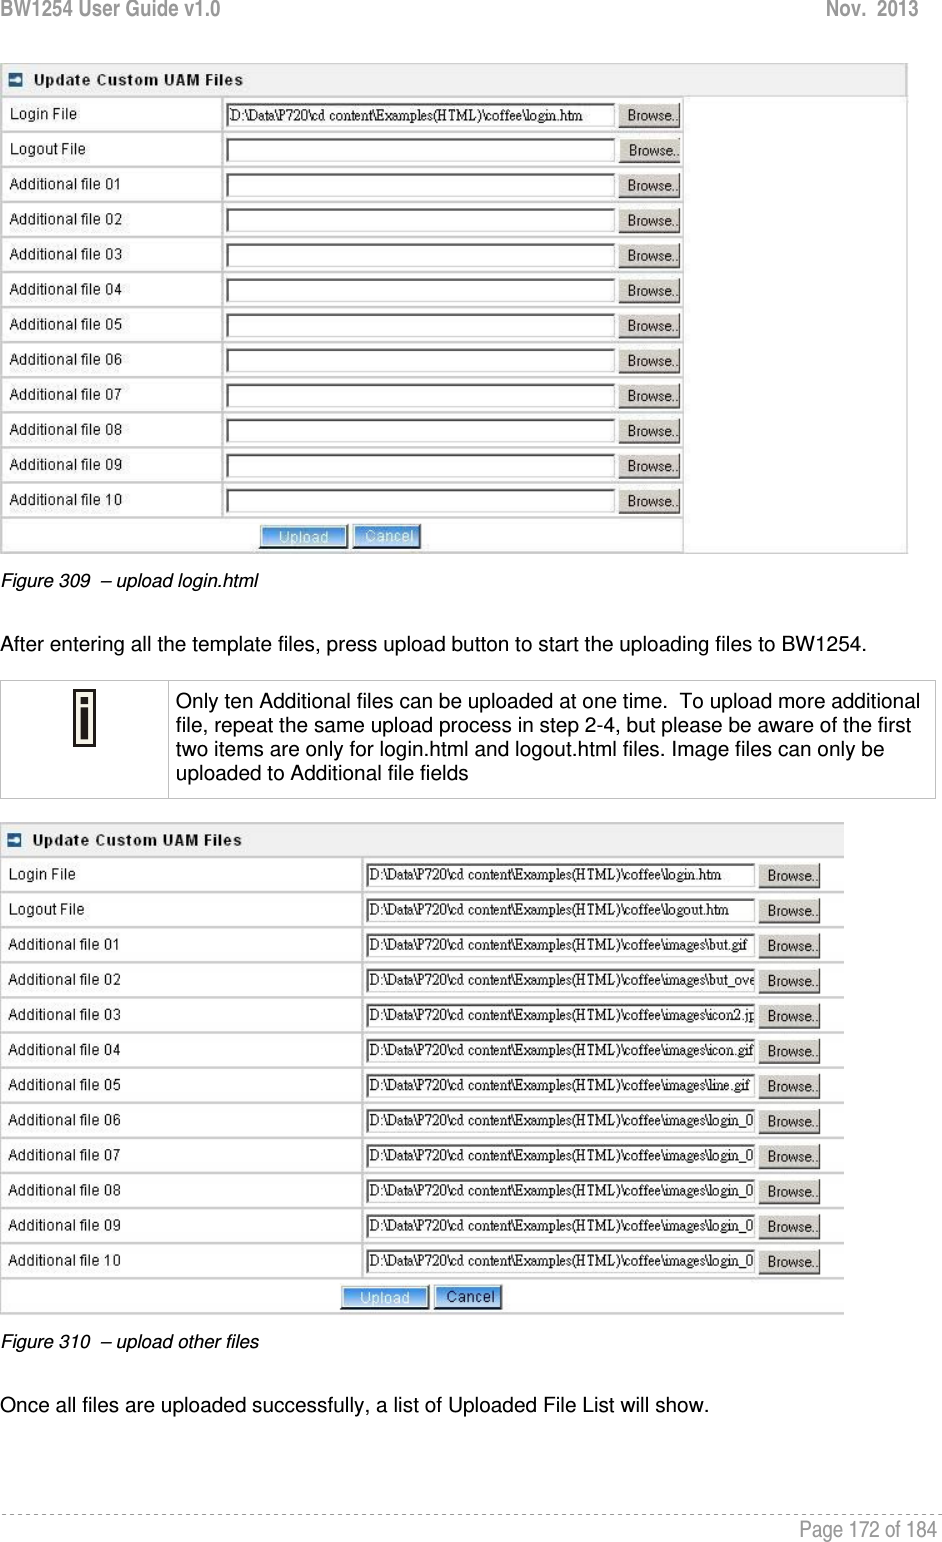 BW1254 User Guide v1.0  Nov.  2013     Page 172 of 184    Figure 309  – upload login.html   After entering all the template files, press upload button to start the uploading files to BW1254.   Only ten Additional files can be uploaded at one time.  To upload more additional file, repeat the same upload process in step 2-4, but please be aware of the first two items are only for login.html and logout.html files. Image files can only be uploaded to Additional file fields   Figure 310  – upload other files   Once all files are uploaded successfully, a list of Uploaded File List will show. 